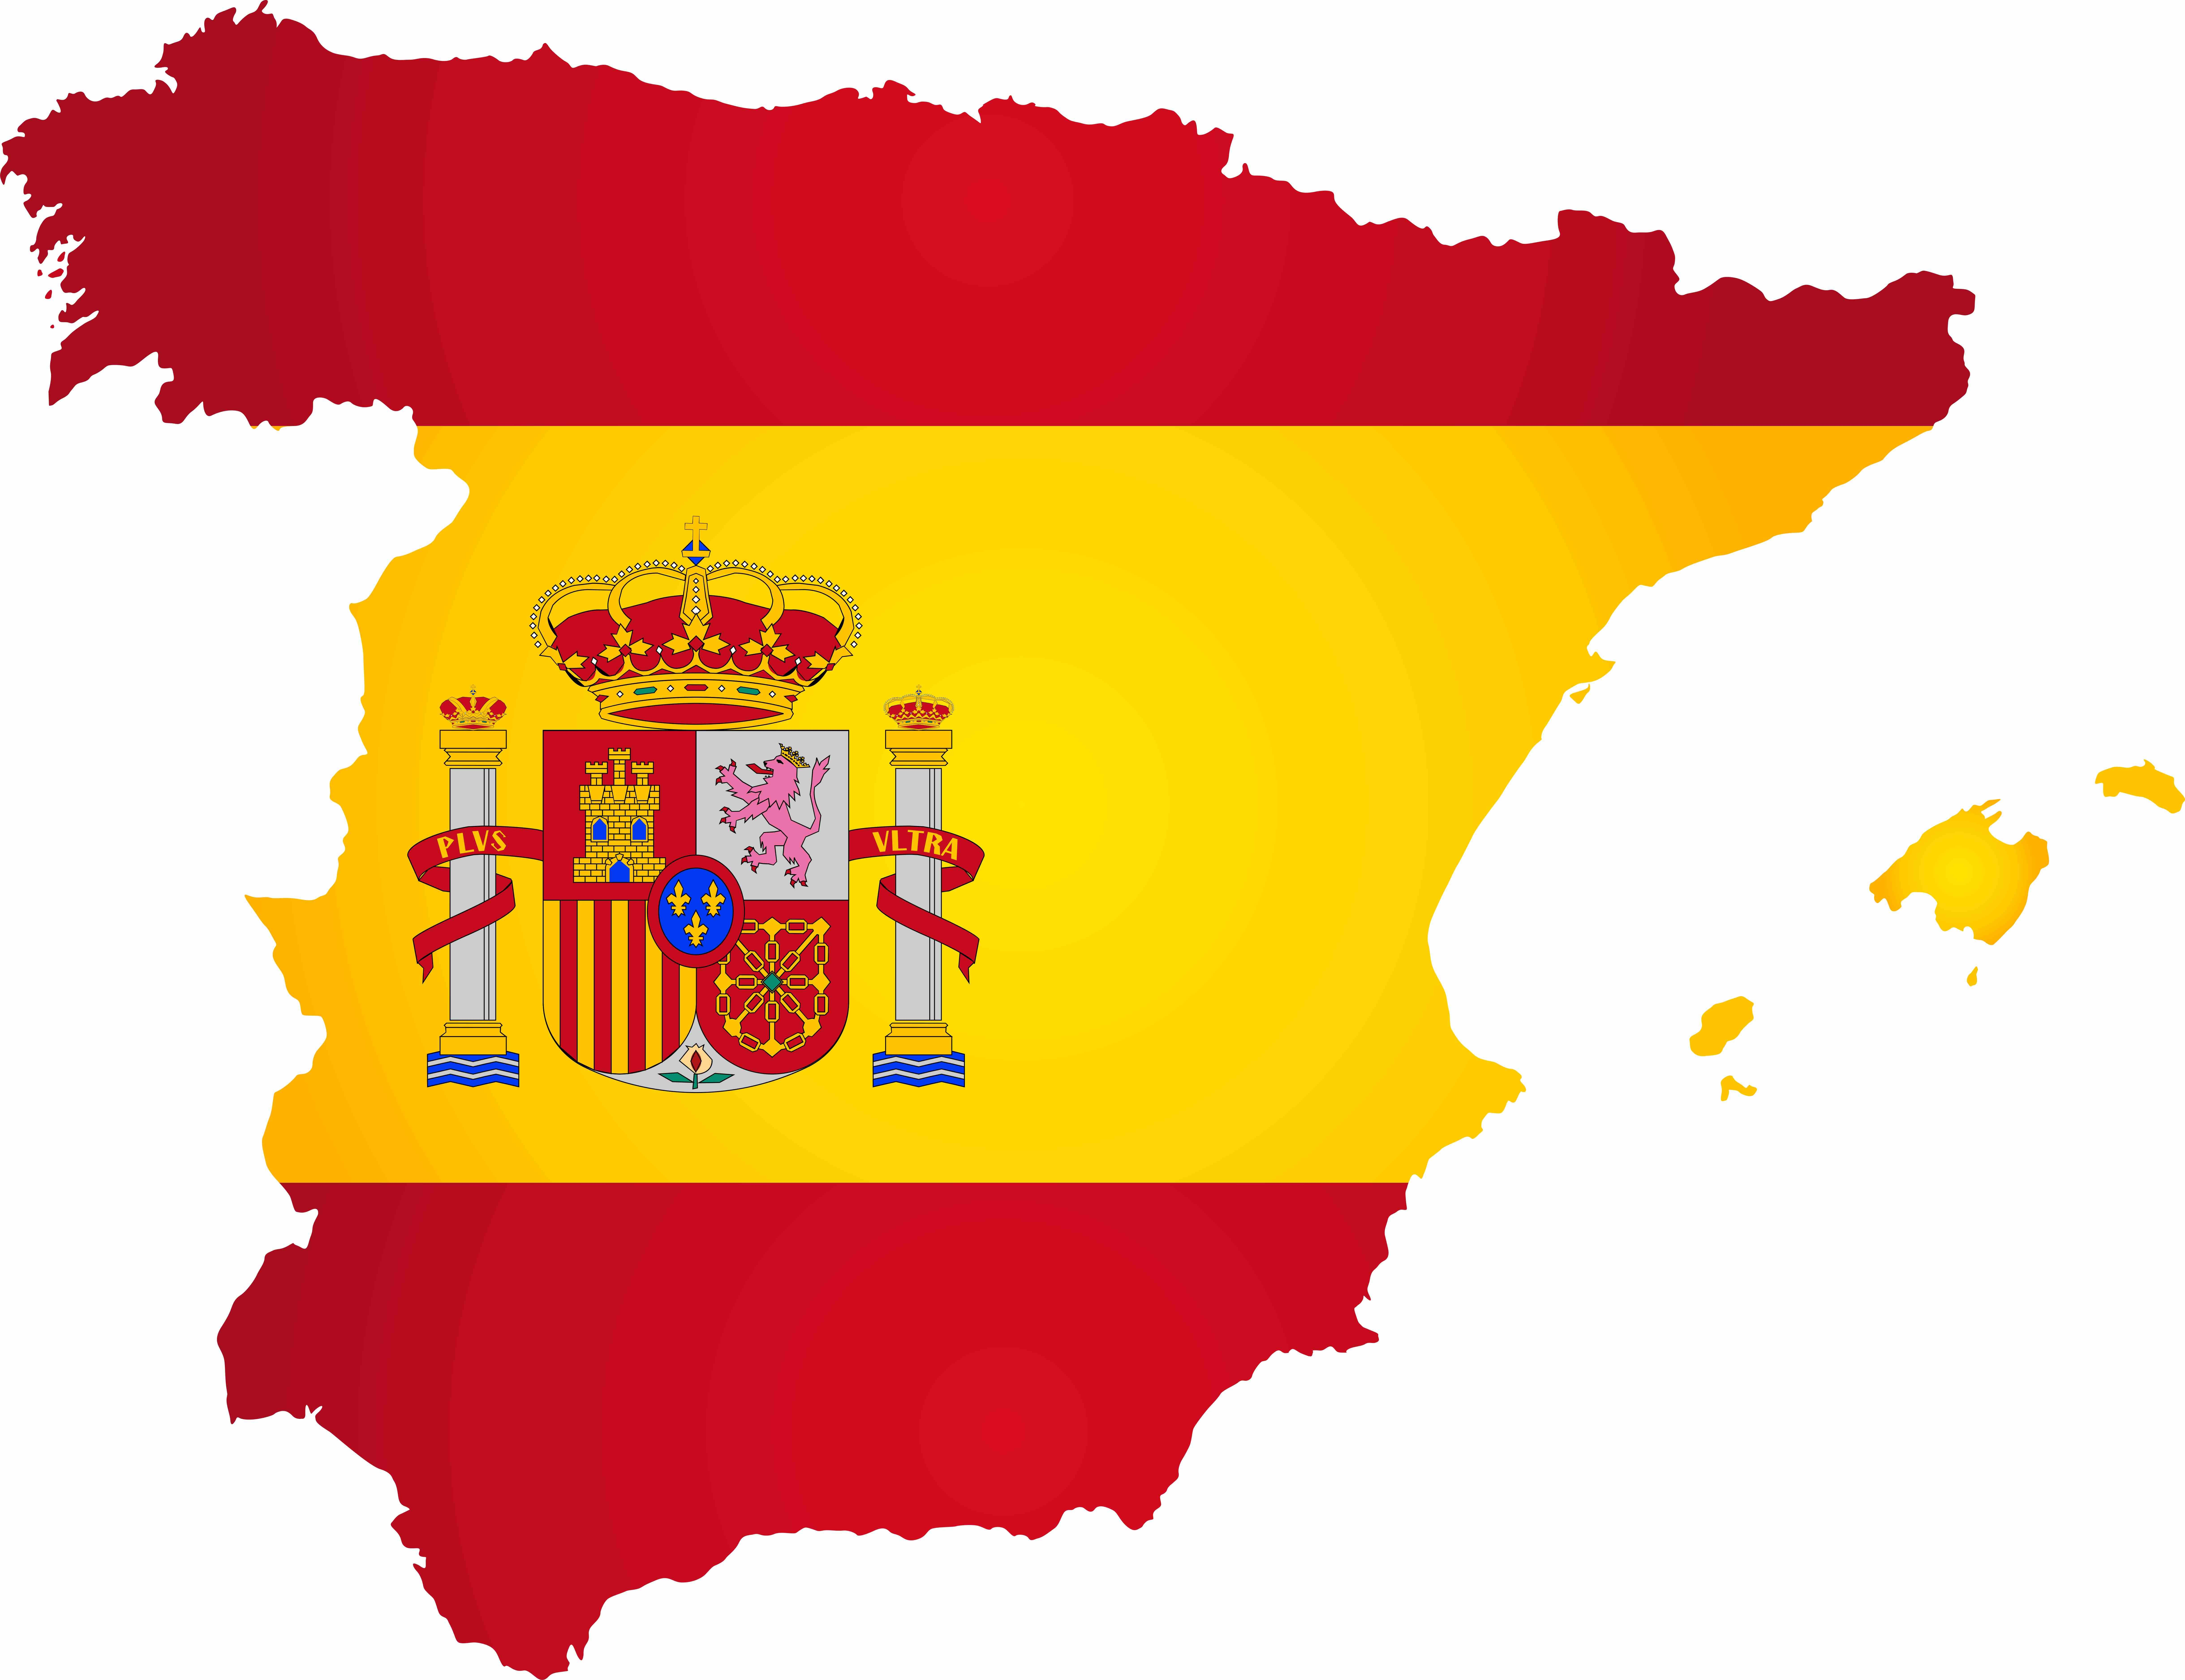 More than a third of foreign investors in Spain are the Americans and British